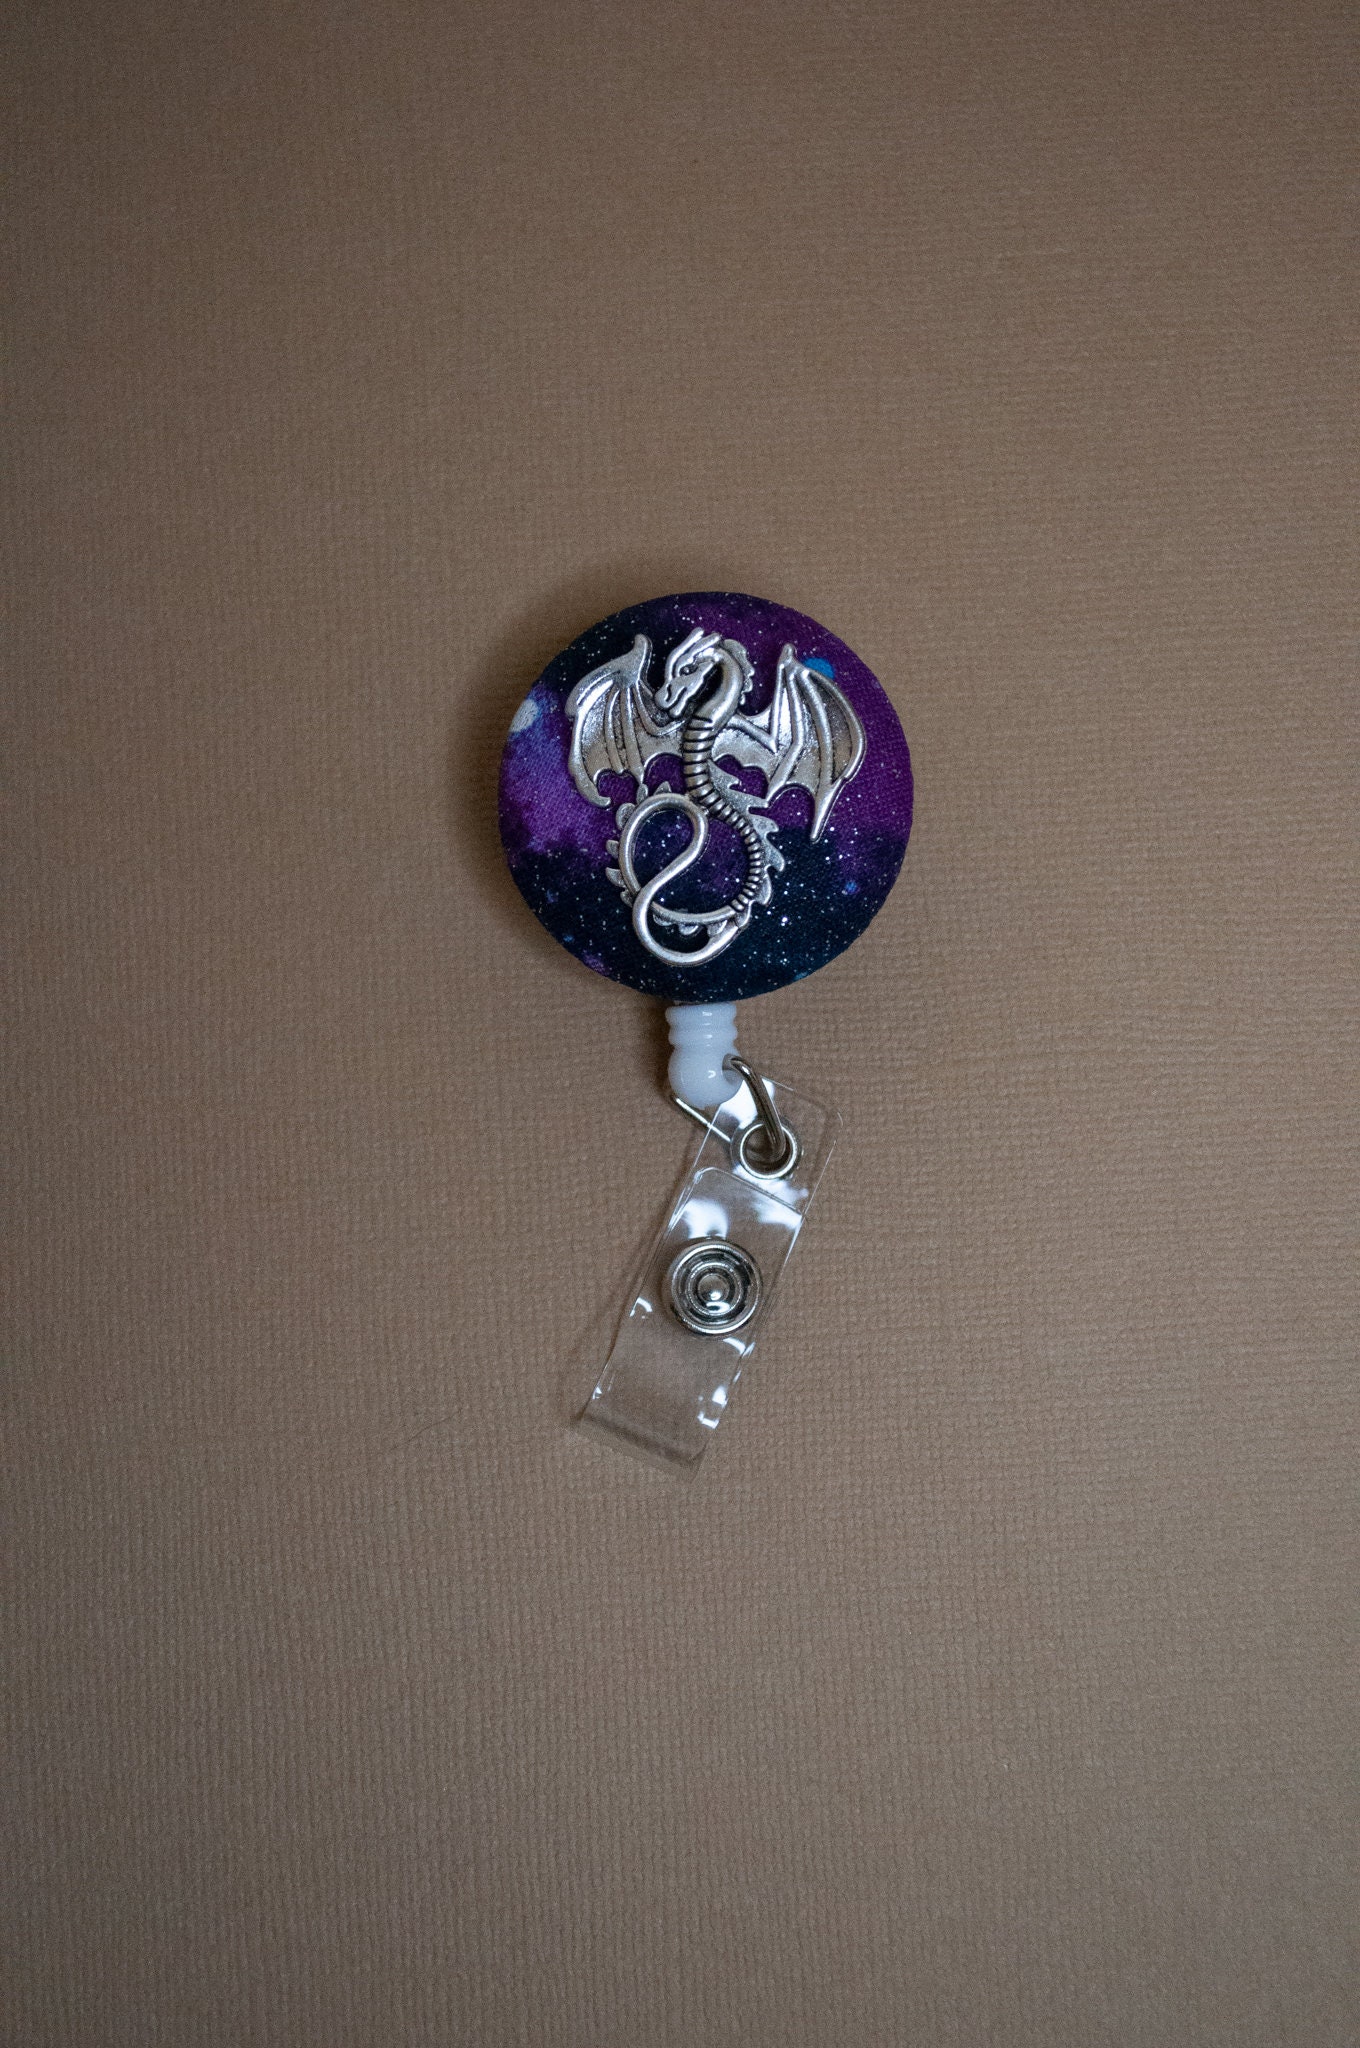 CHANEL INSPIRED - Retractable ID Badge Reel/Holder by beasbuzzdesigns on  DeviantArt